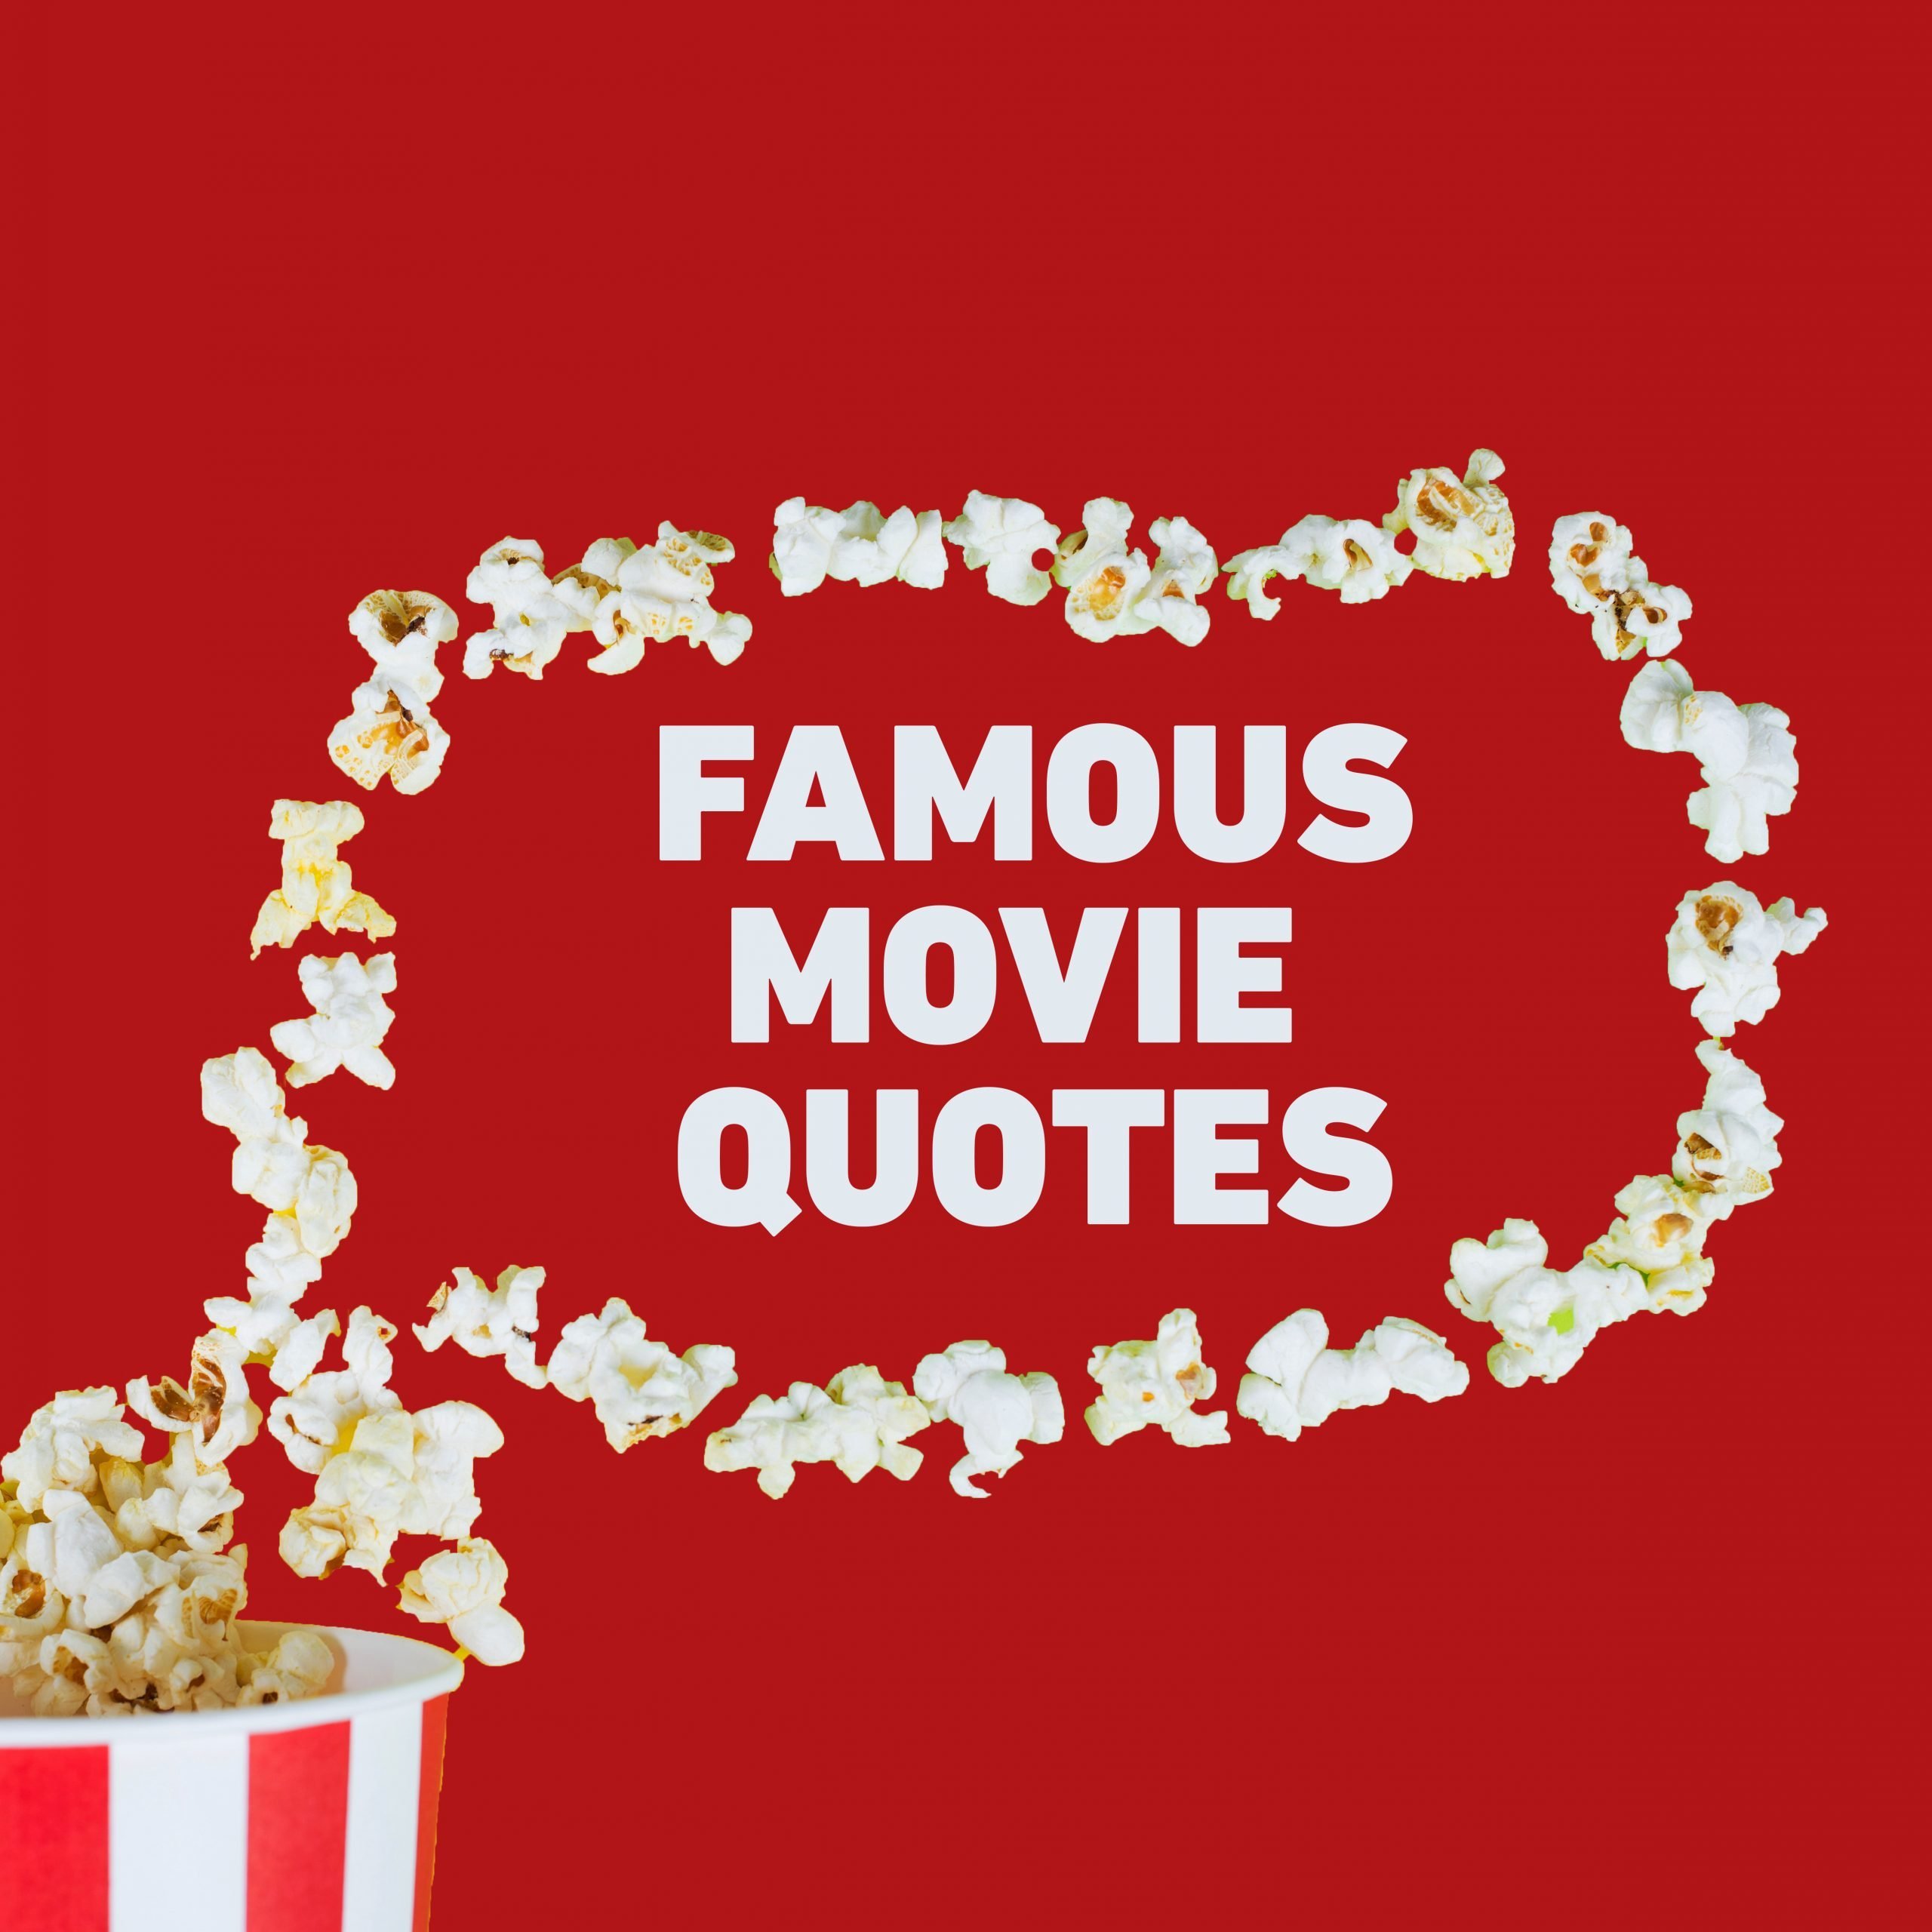 movie-quotes-famous-clever-memorable-film-quotes